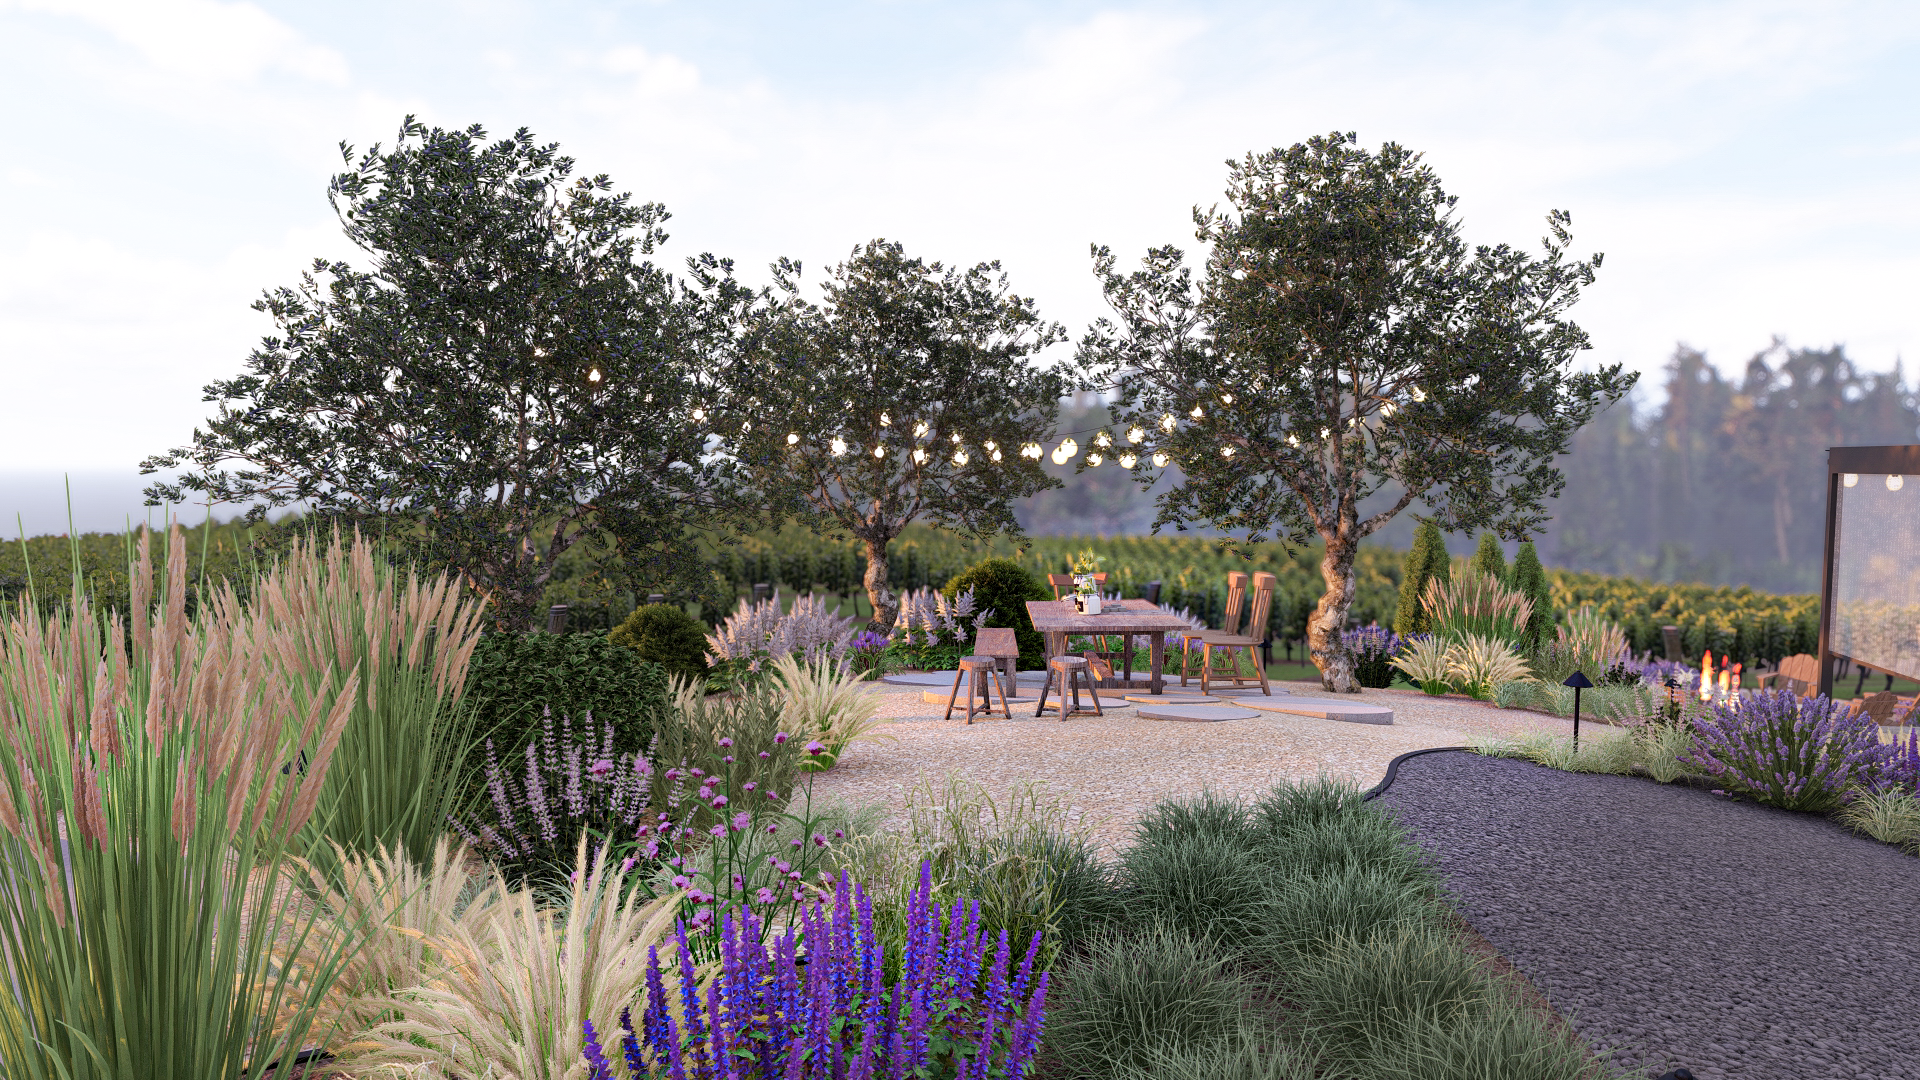 Expansive view of vineyard with chairs around an outdoor dining table on gravel with lush plantings around